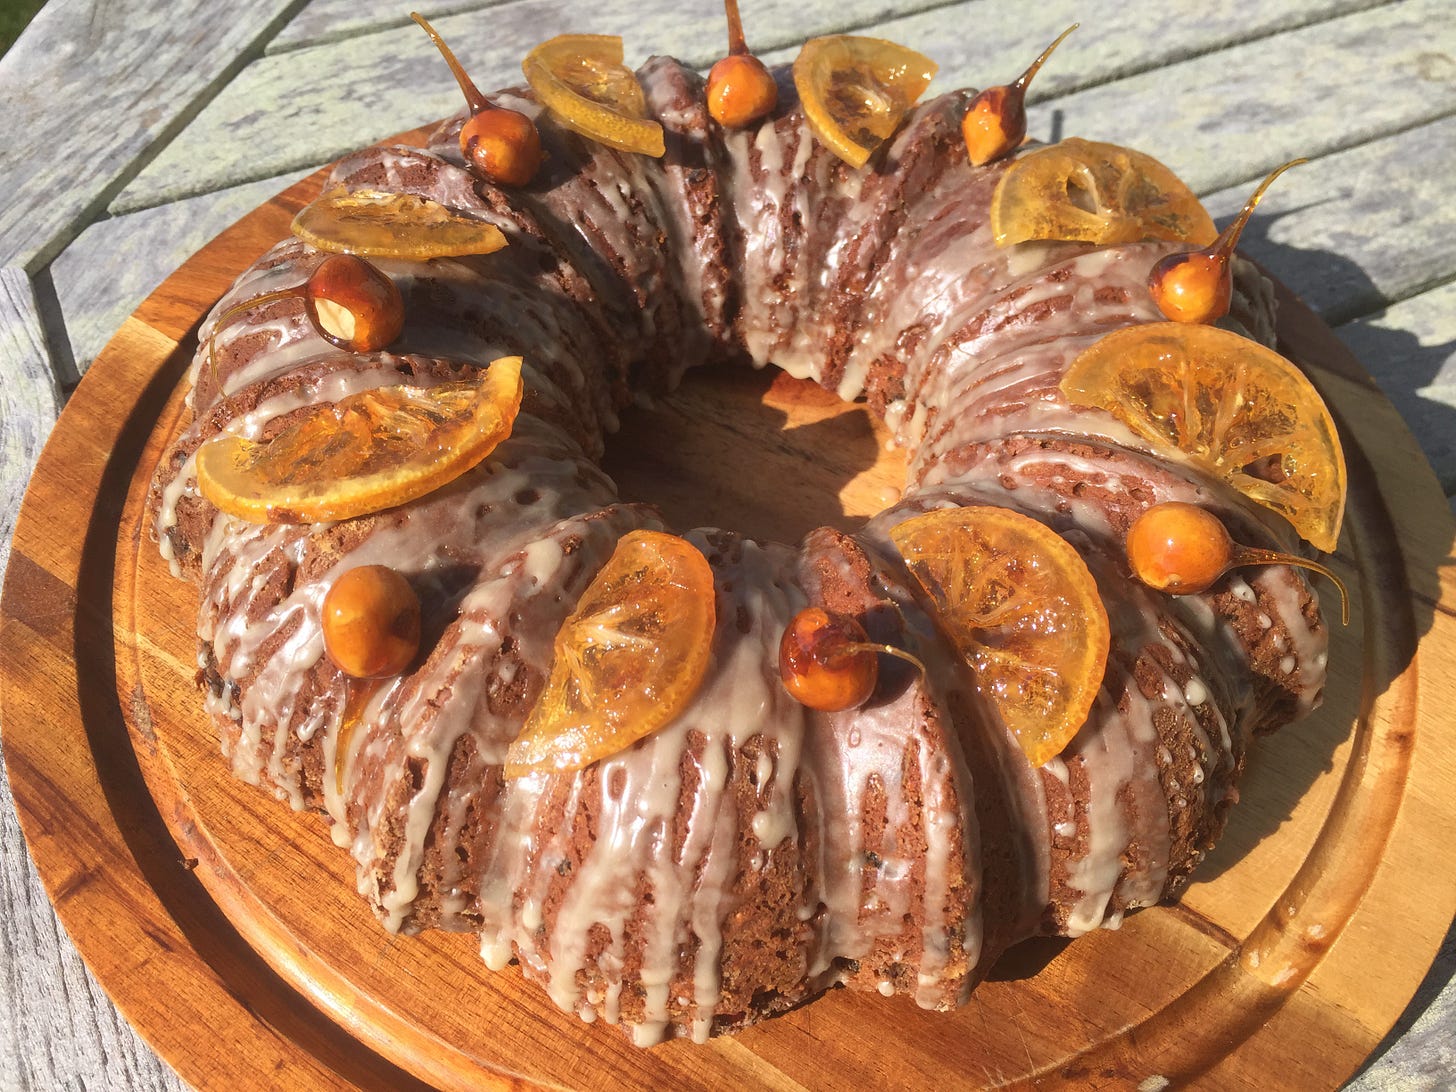 A round bundt cake drizzled with a light glaze, and topped with candied lemon wedges and hazelnuts dipped in caramel.